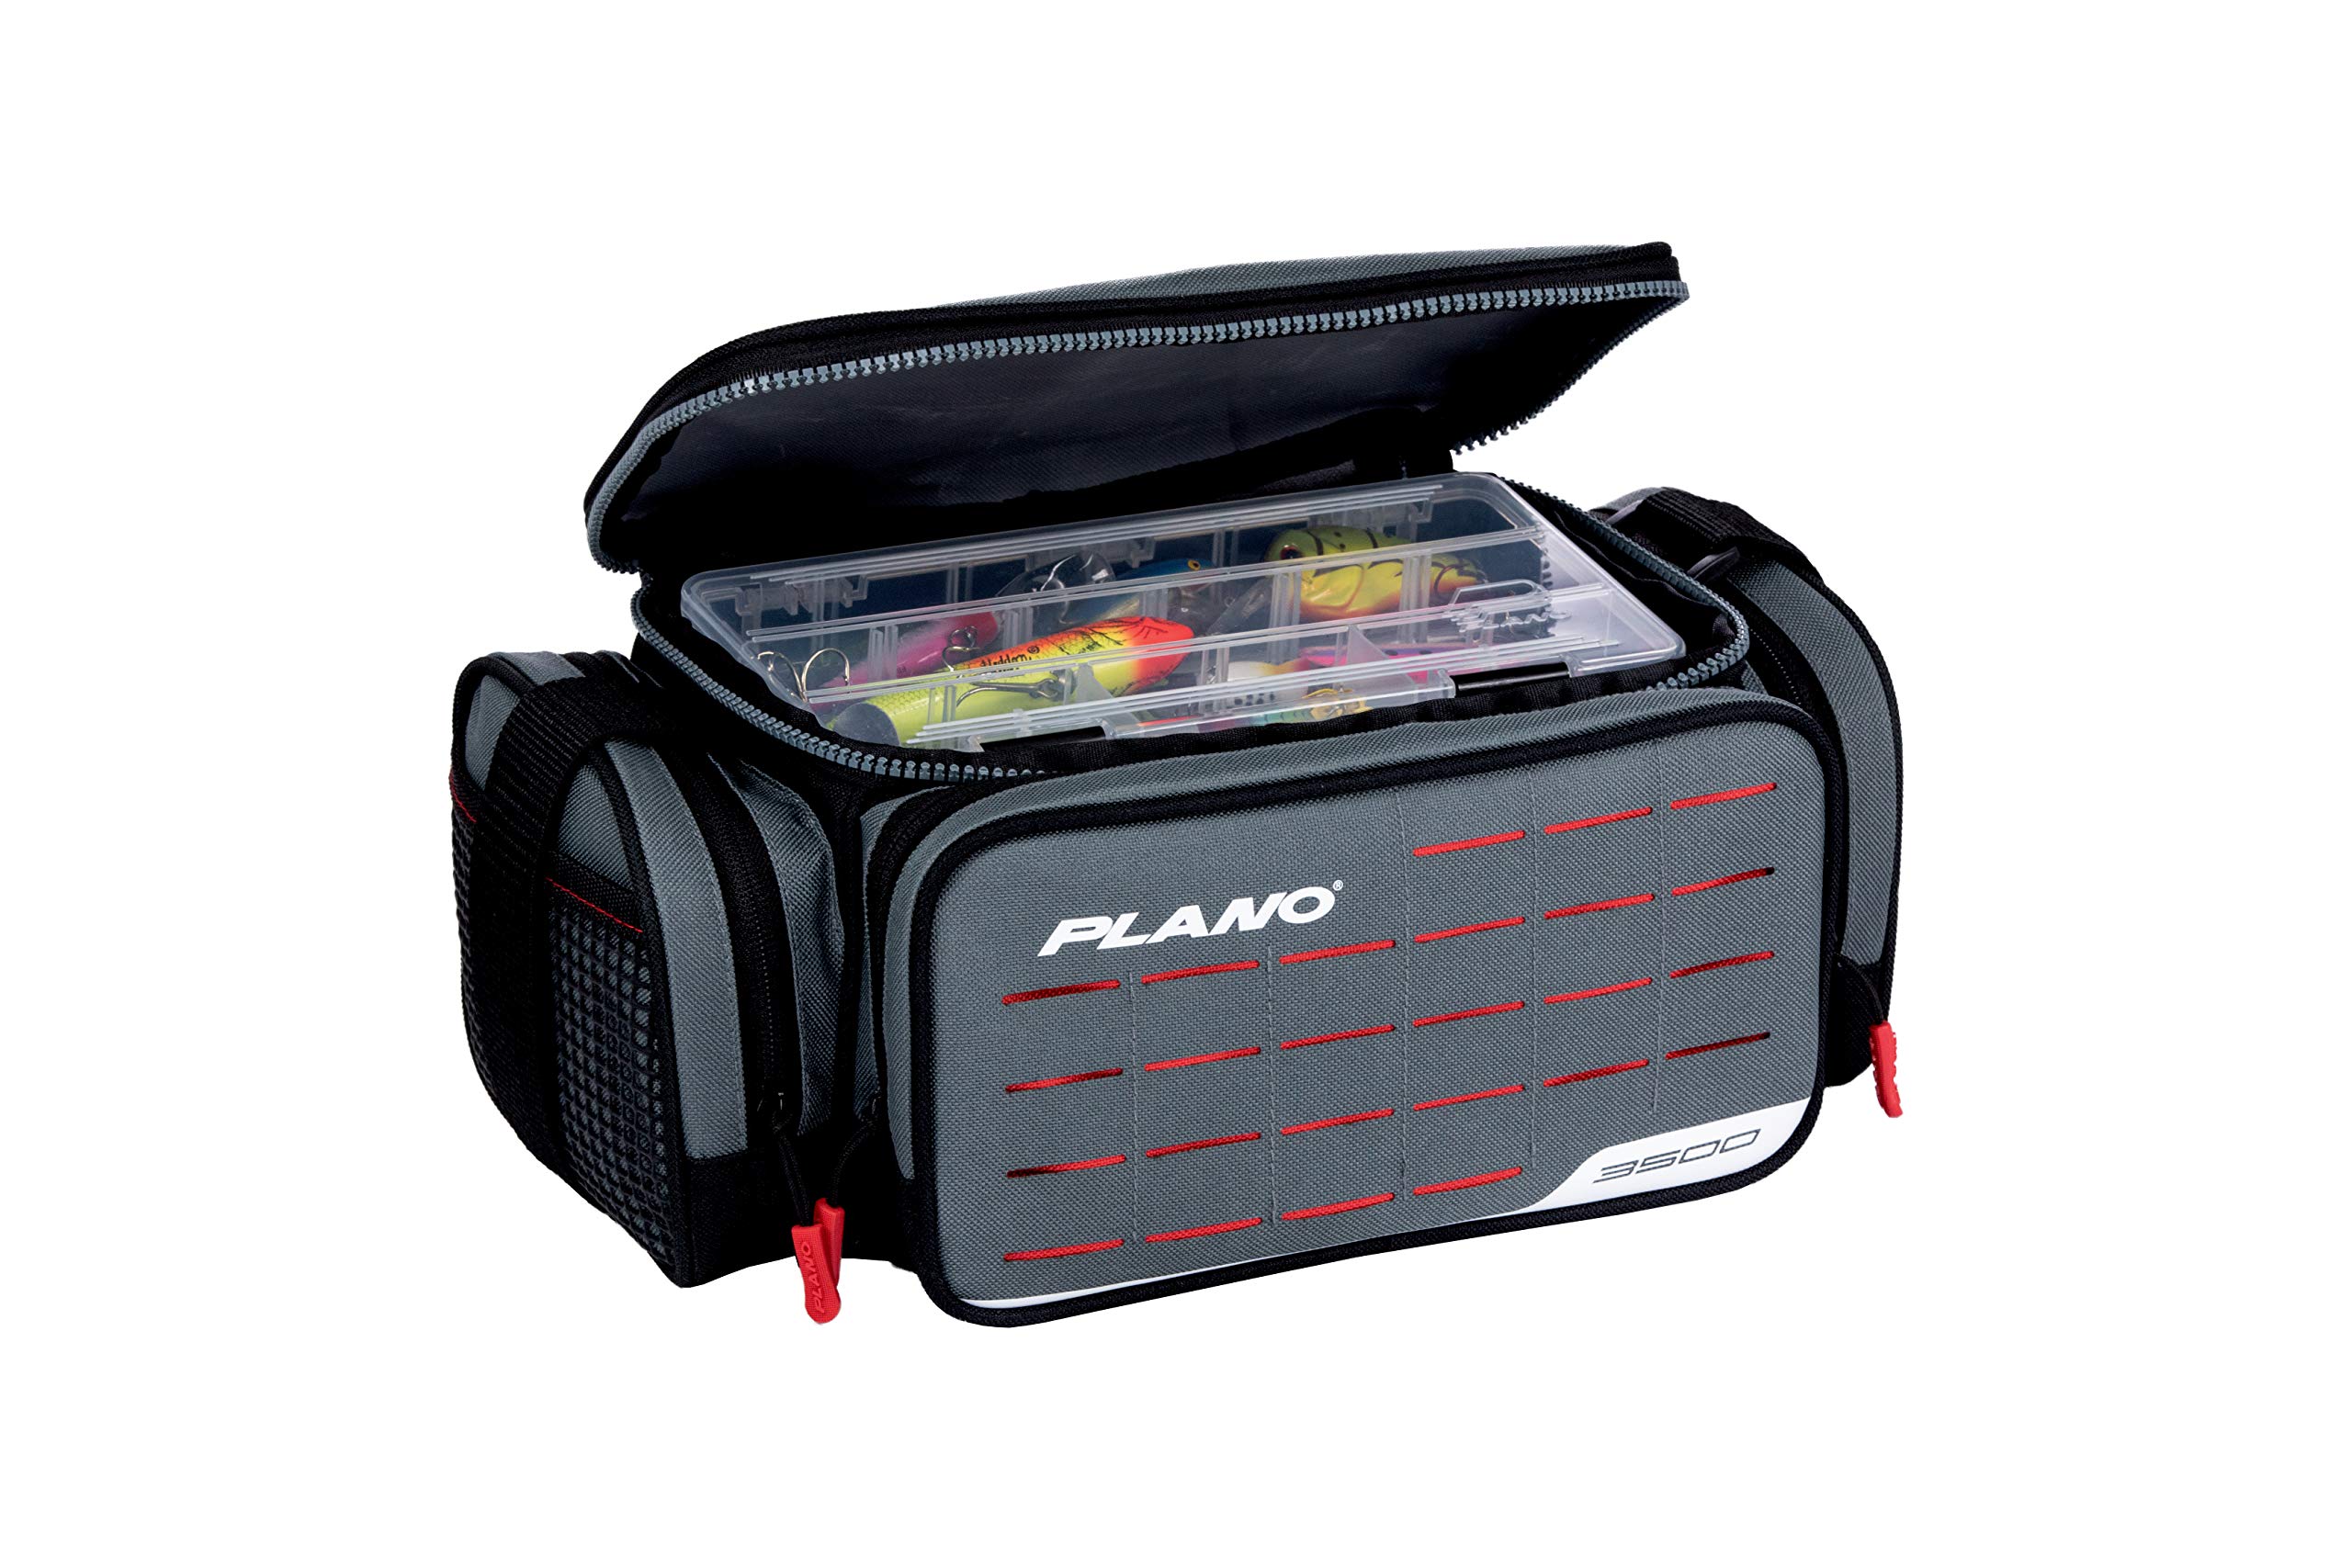 Plano Weekend Series 3500 Softsider Tackle Bag, Gray Fabric, Includes 2  3500 Stowaway Storage Boxes, Soft